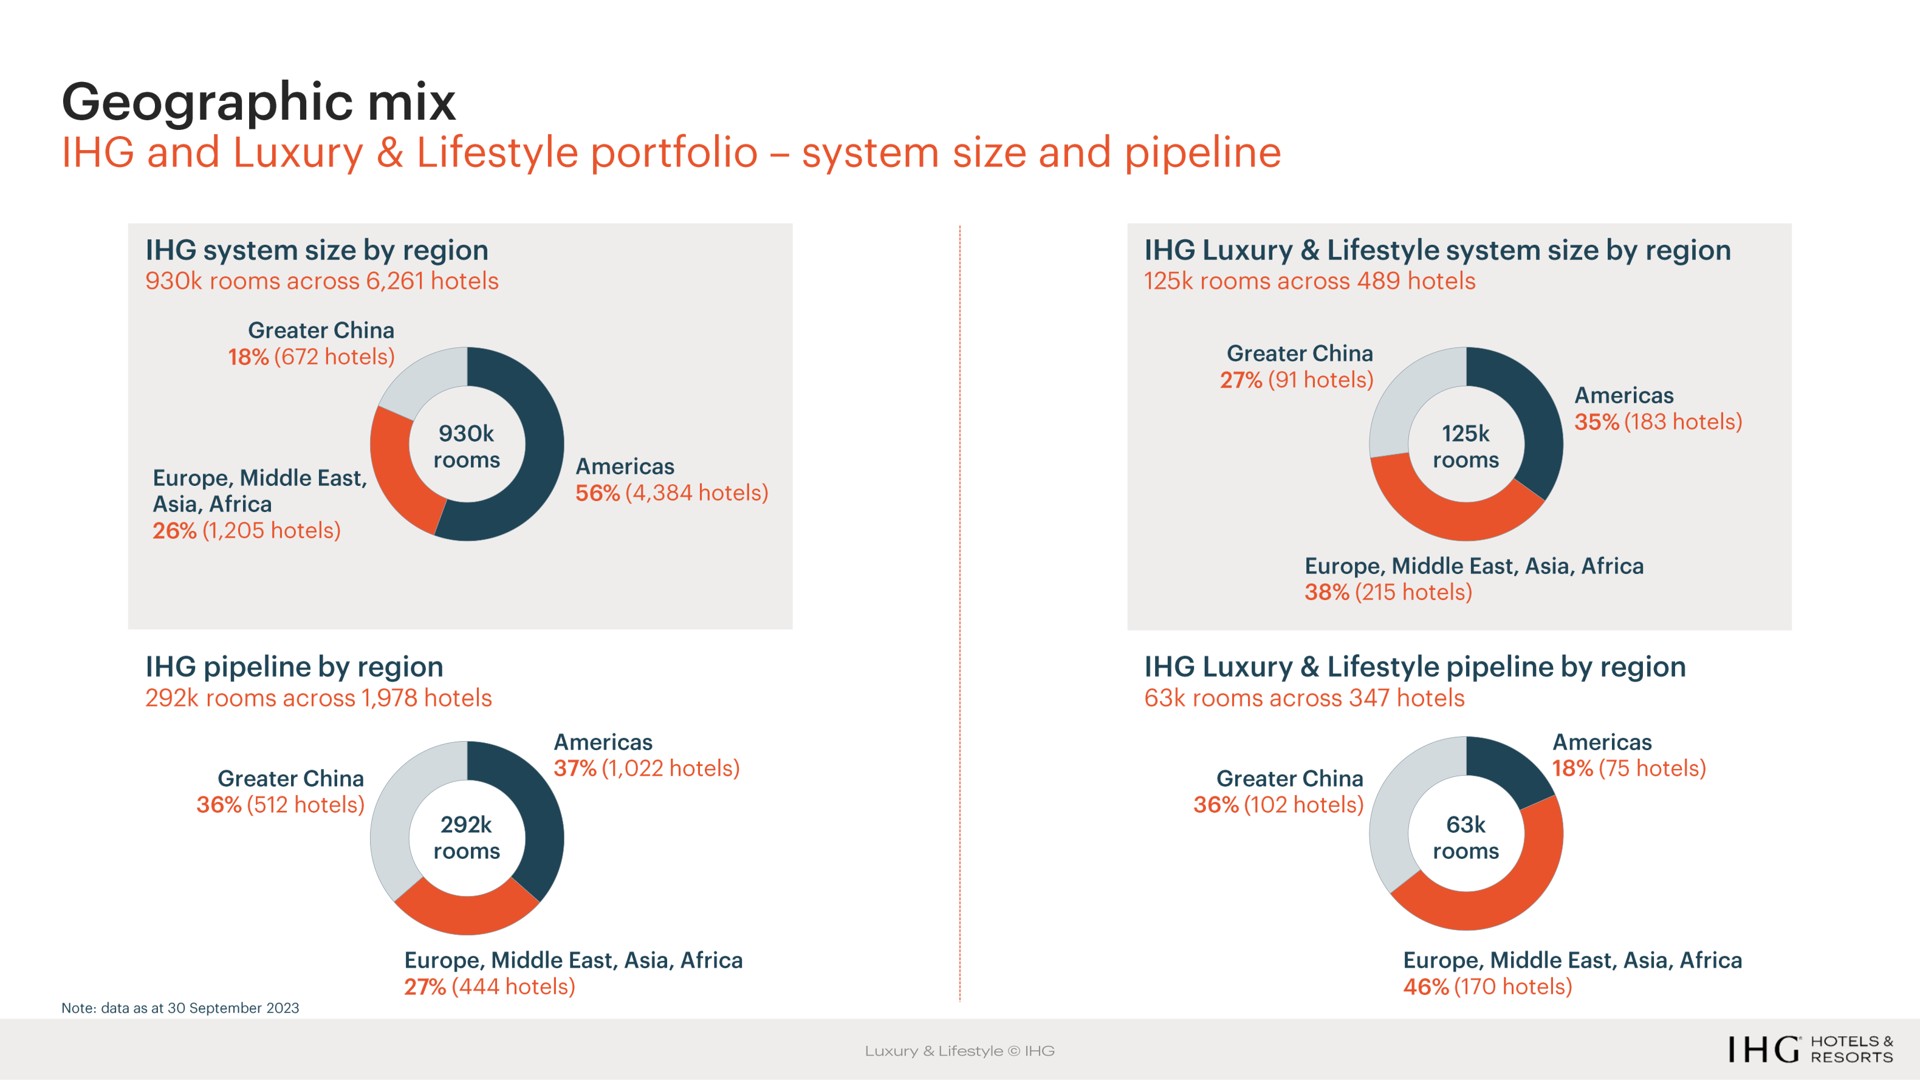 geographic mix and luxury portfolio system size and pipeline system size by region rooms across hotels greater china hotels middle east hotels rooms hotels pipeline by region rooms across hotels hotels rooms hotels luxury system size by region rooms across hotels greater china hotels hotels rooms middle east hotels luxury pipeline by region rooms across hotels greater china hotels rooms hotels note data as at middle east hotels middle east hotels luxury resorts | IHG Hotels